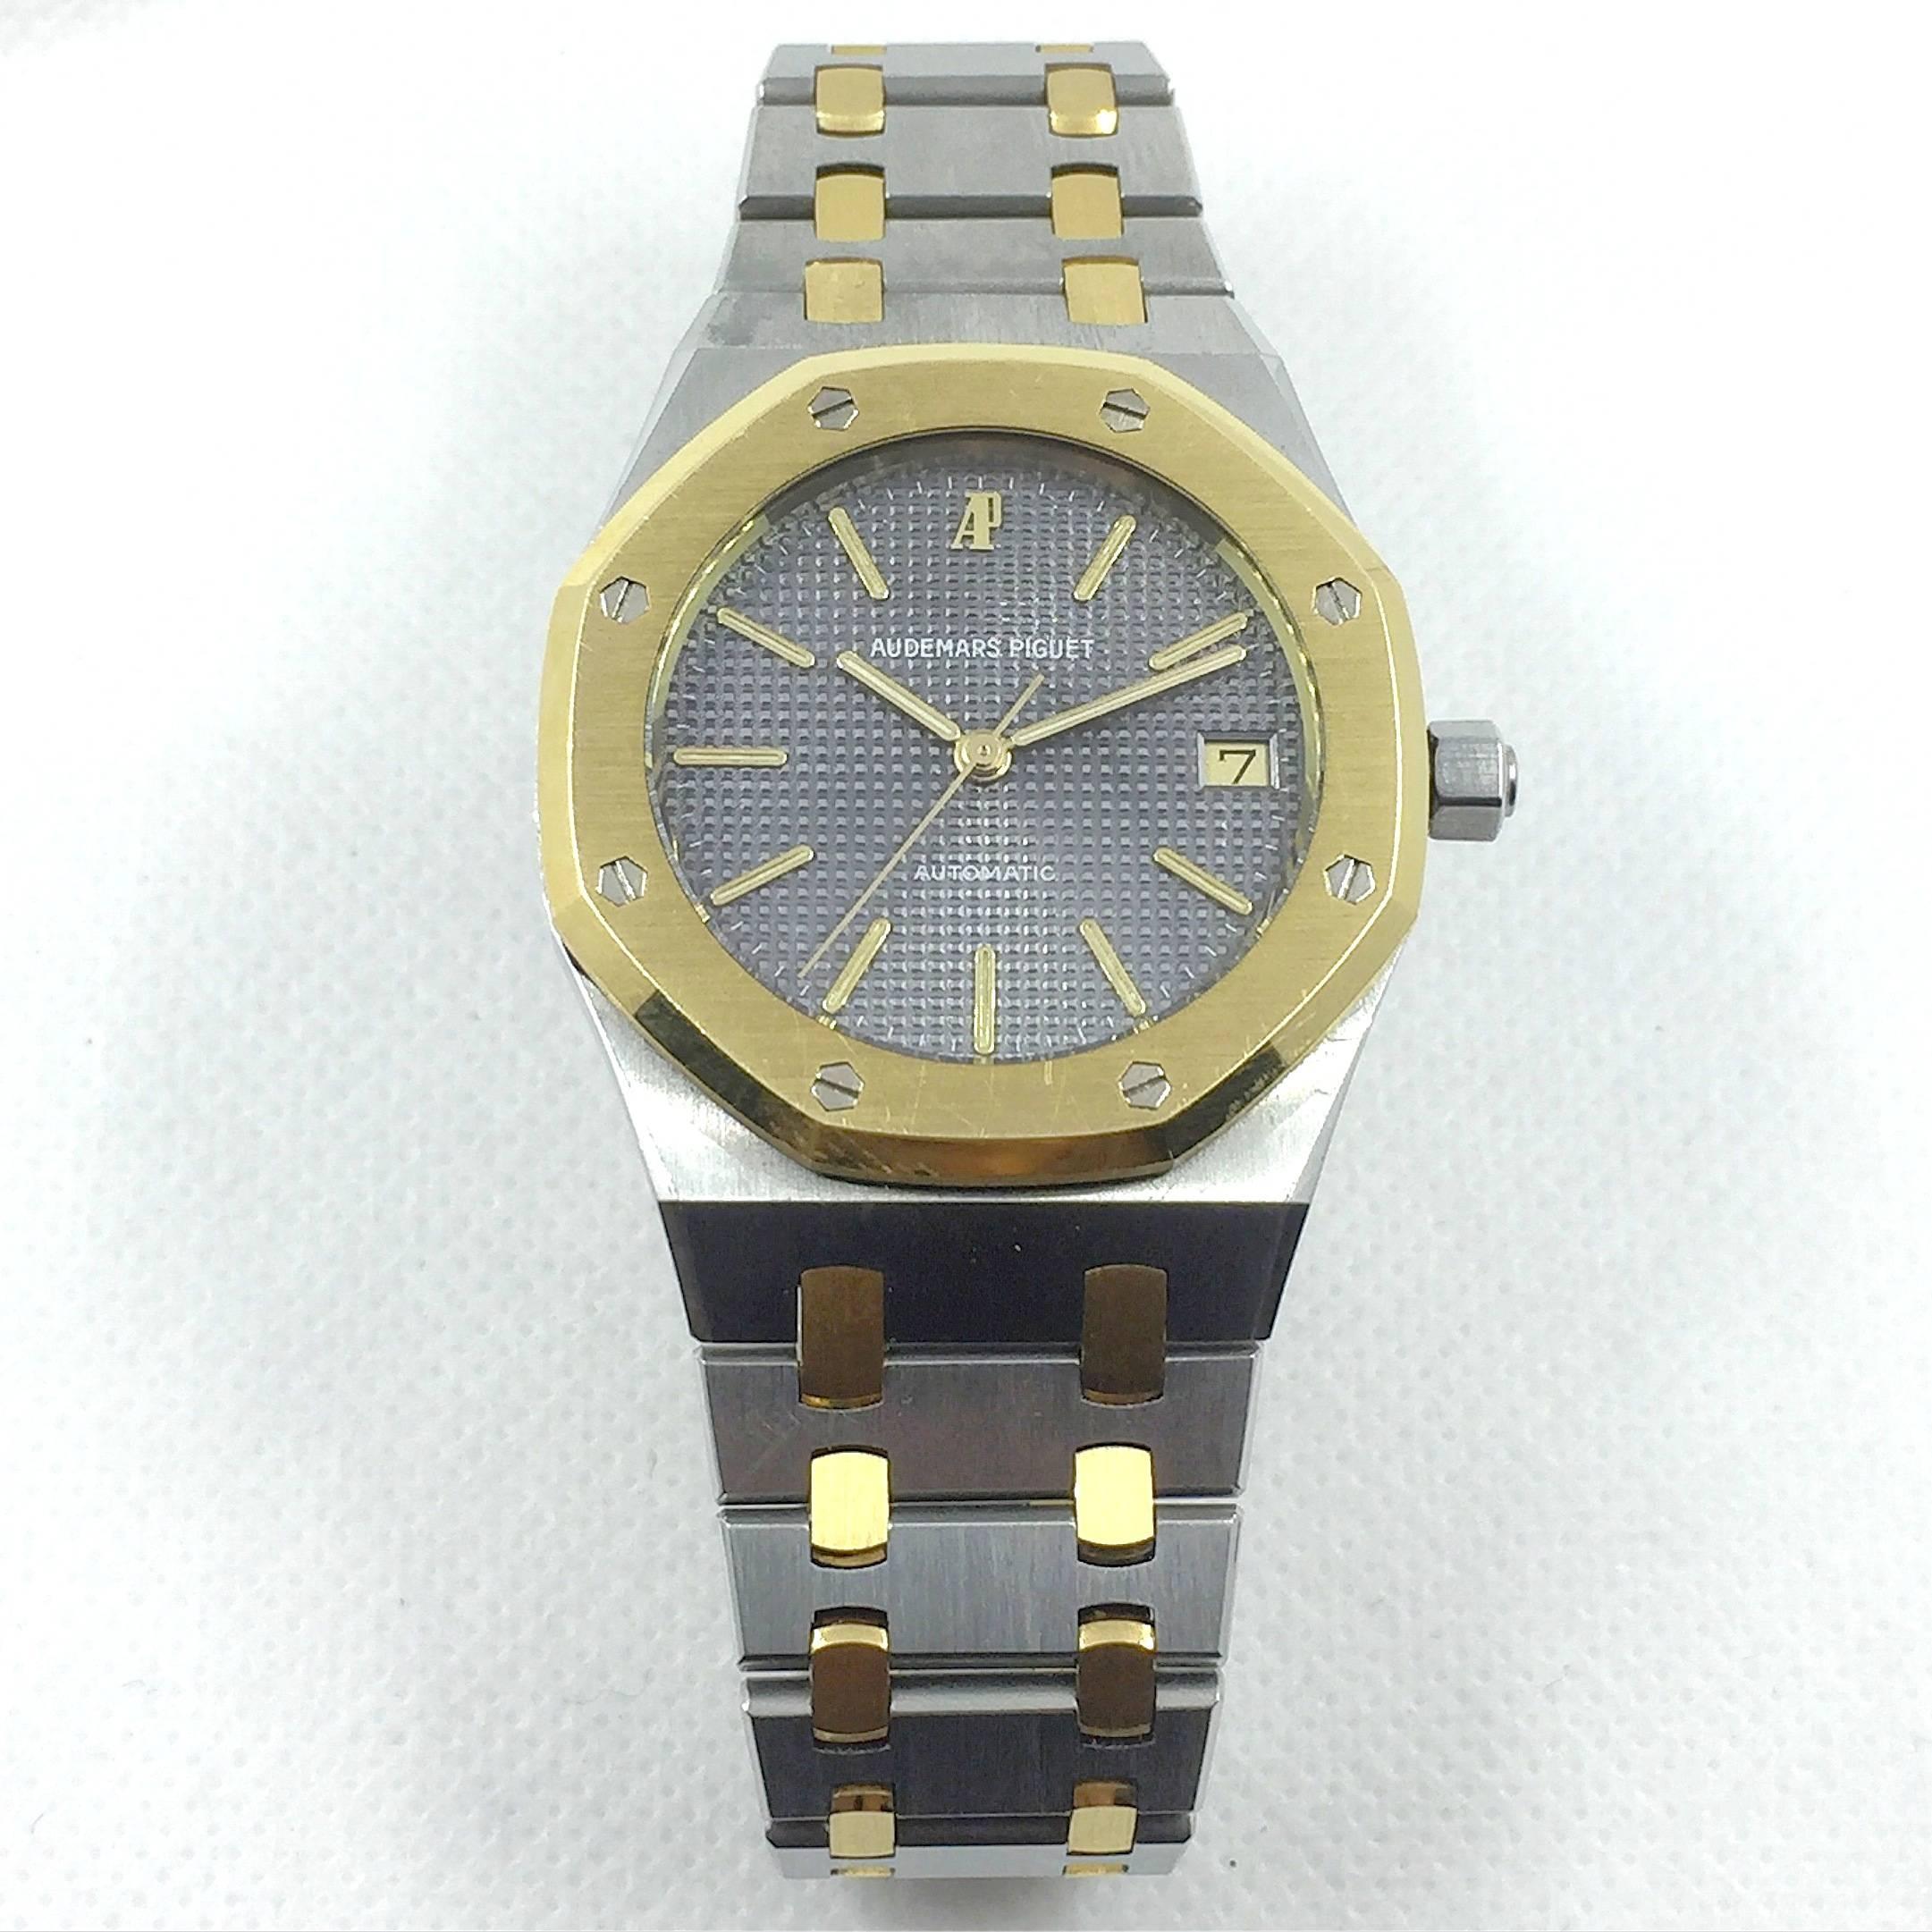 Audemars Piguet Royal Oak Automatic Wristwatch
Stainless Steel and 18K Yellow Gold Case
35MM 
18K Yellow Gold Bezel
Stainless Steel and 18K Yellow Gold Integrated Bracelet with Audemars Piguet Signature Clasp
Factory Grey Waffle Dial with Applied